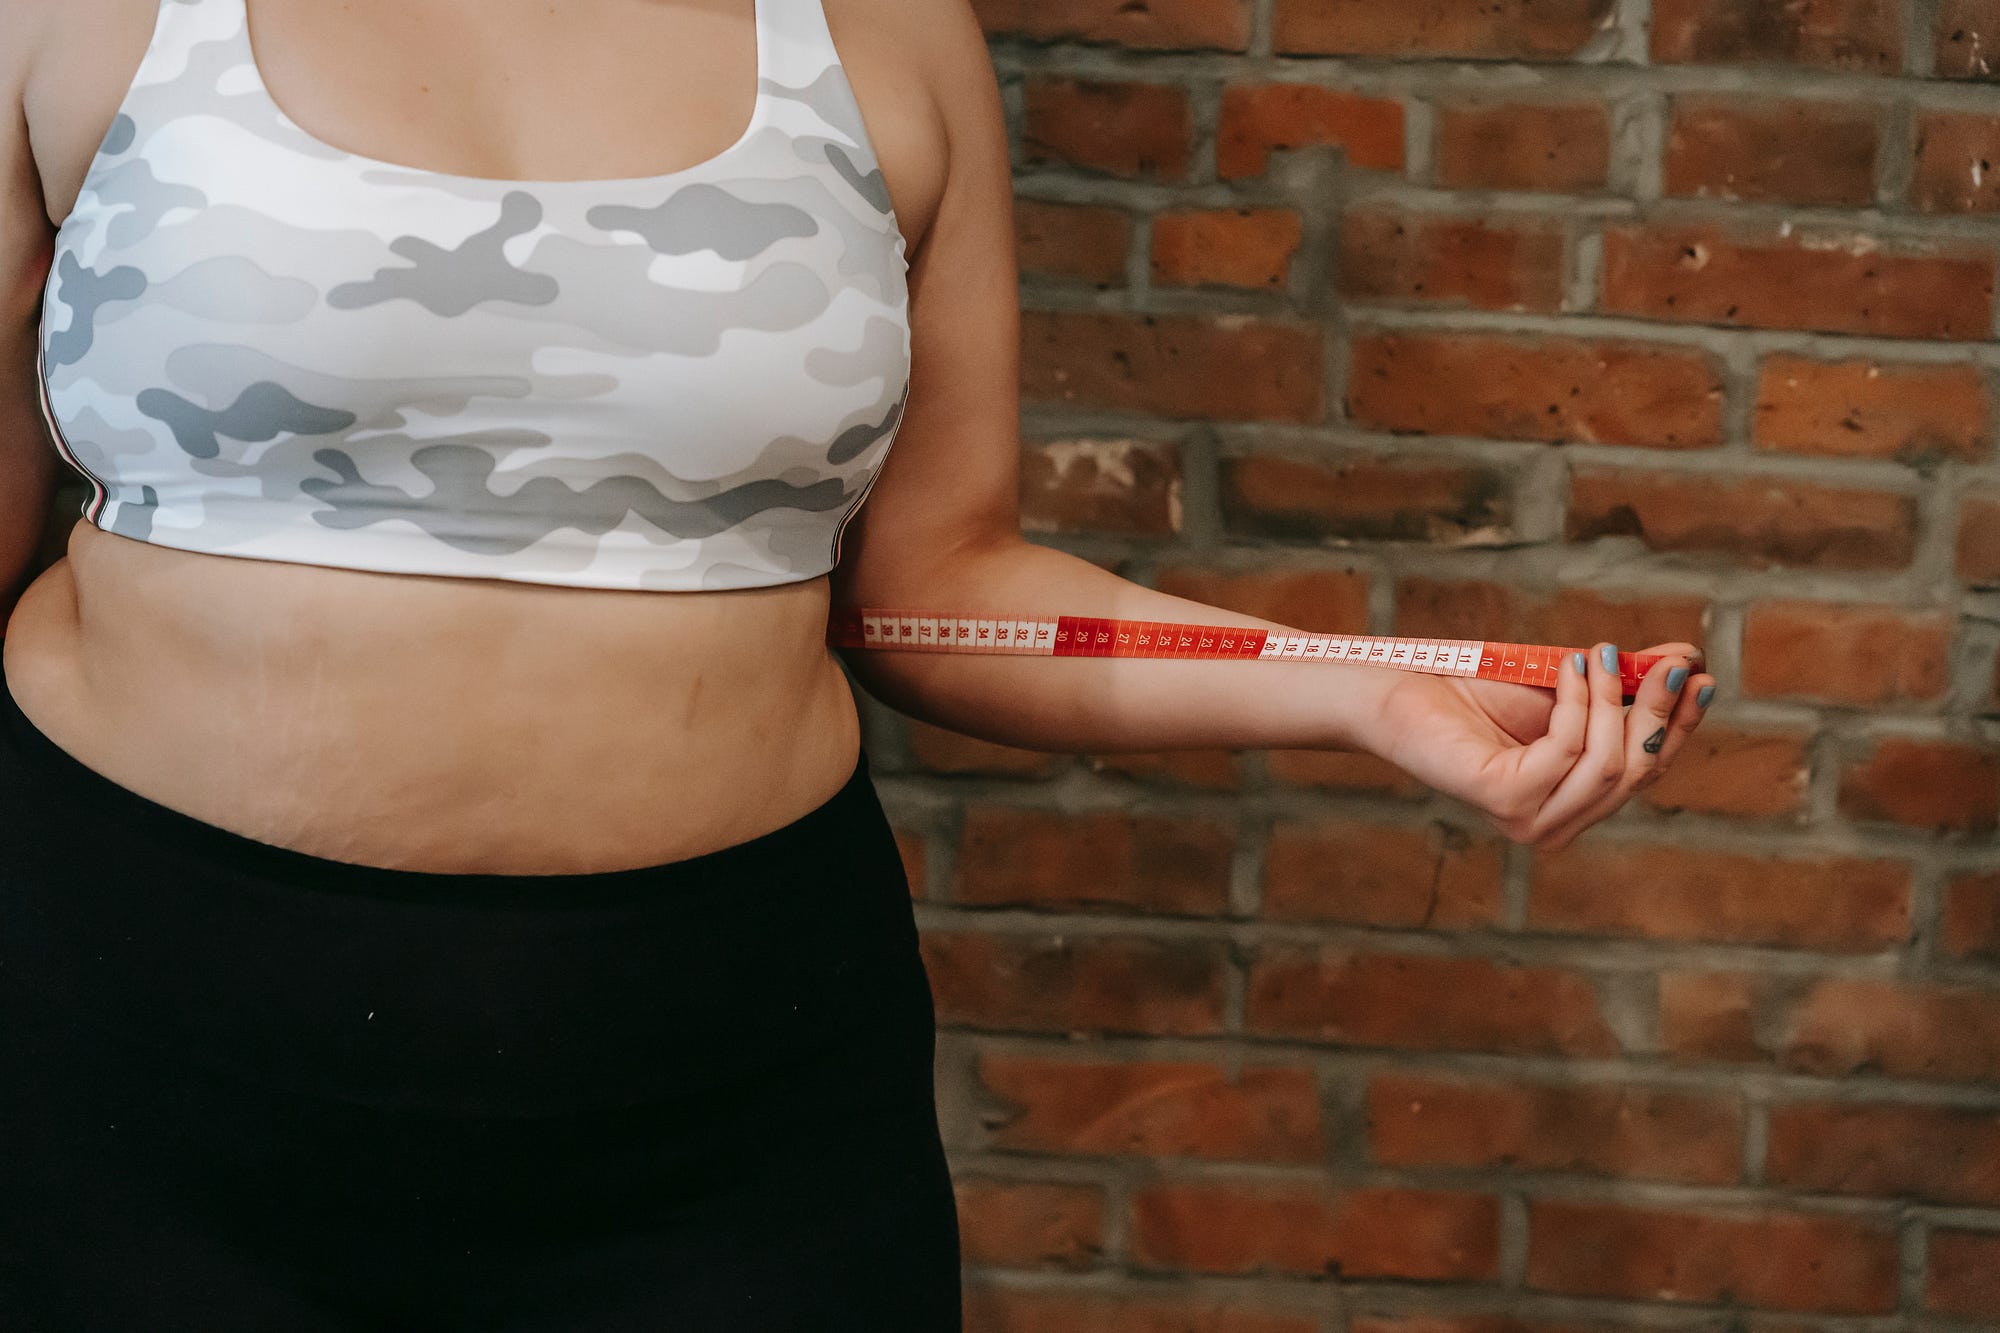 Dear Women, Shall We Stop Obsessing About Having Flat Abs?